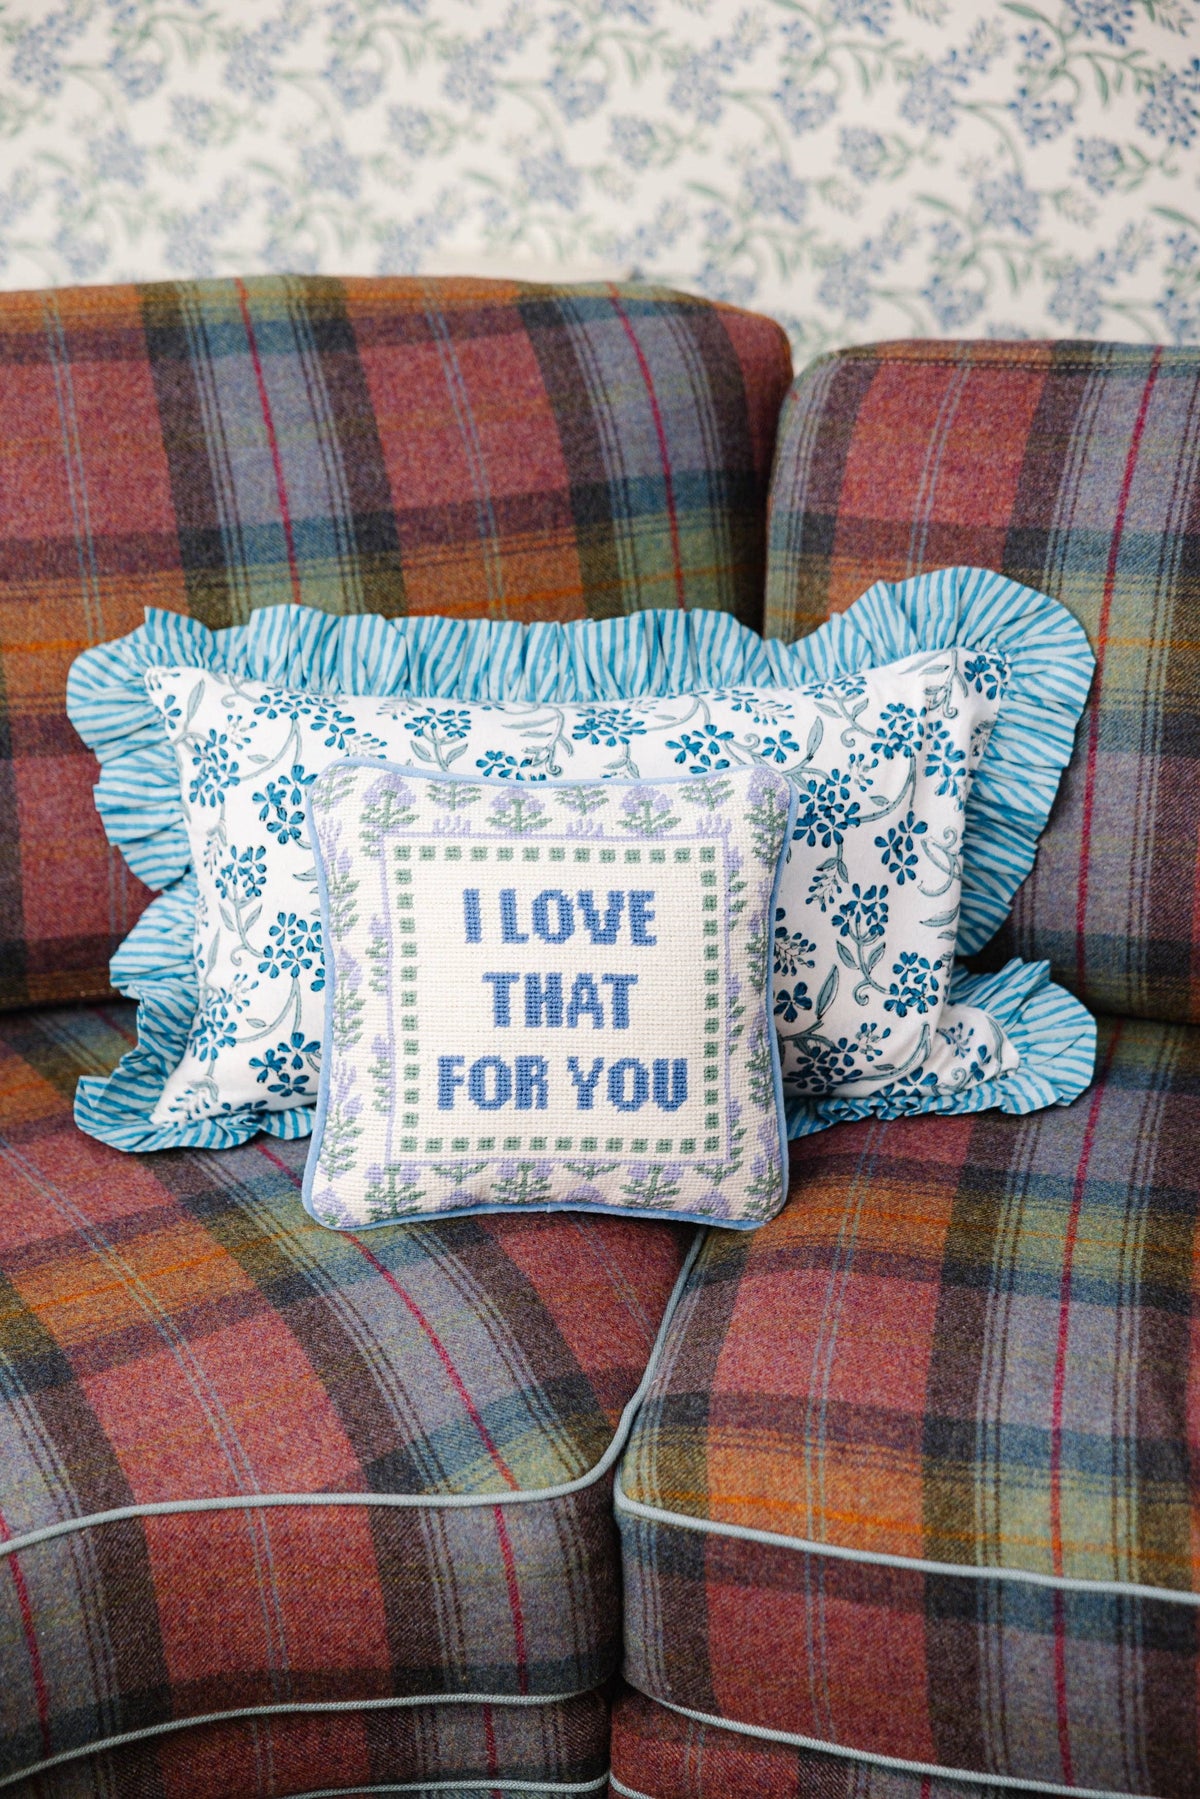 Love That for You Needlepoint Pillow - The Preppy Bunny